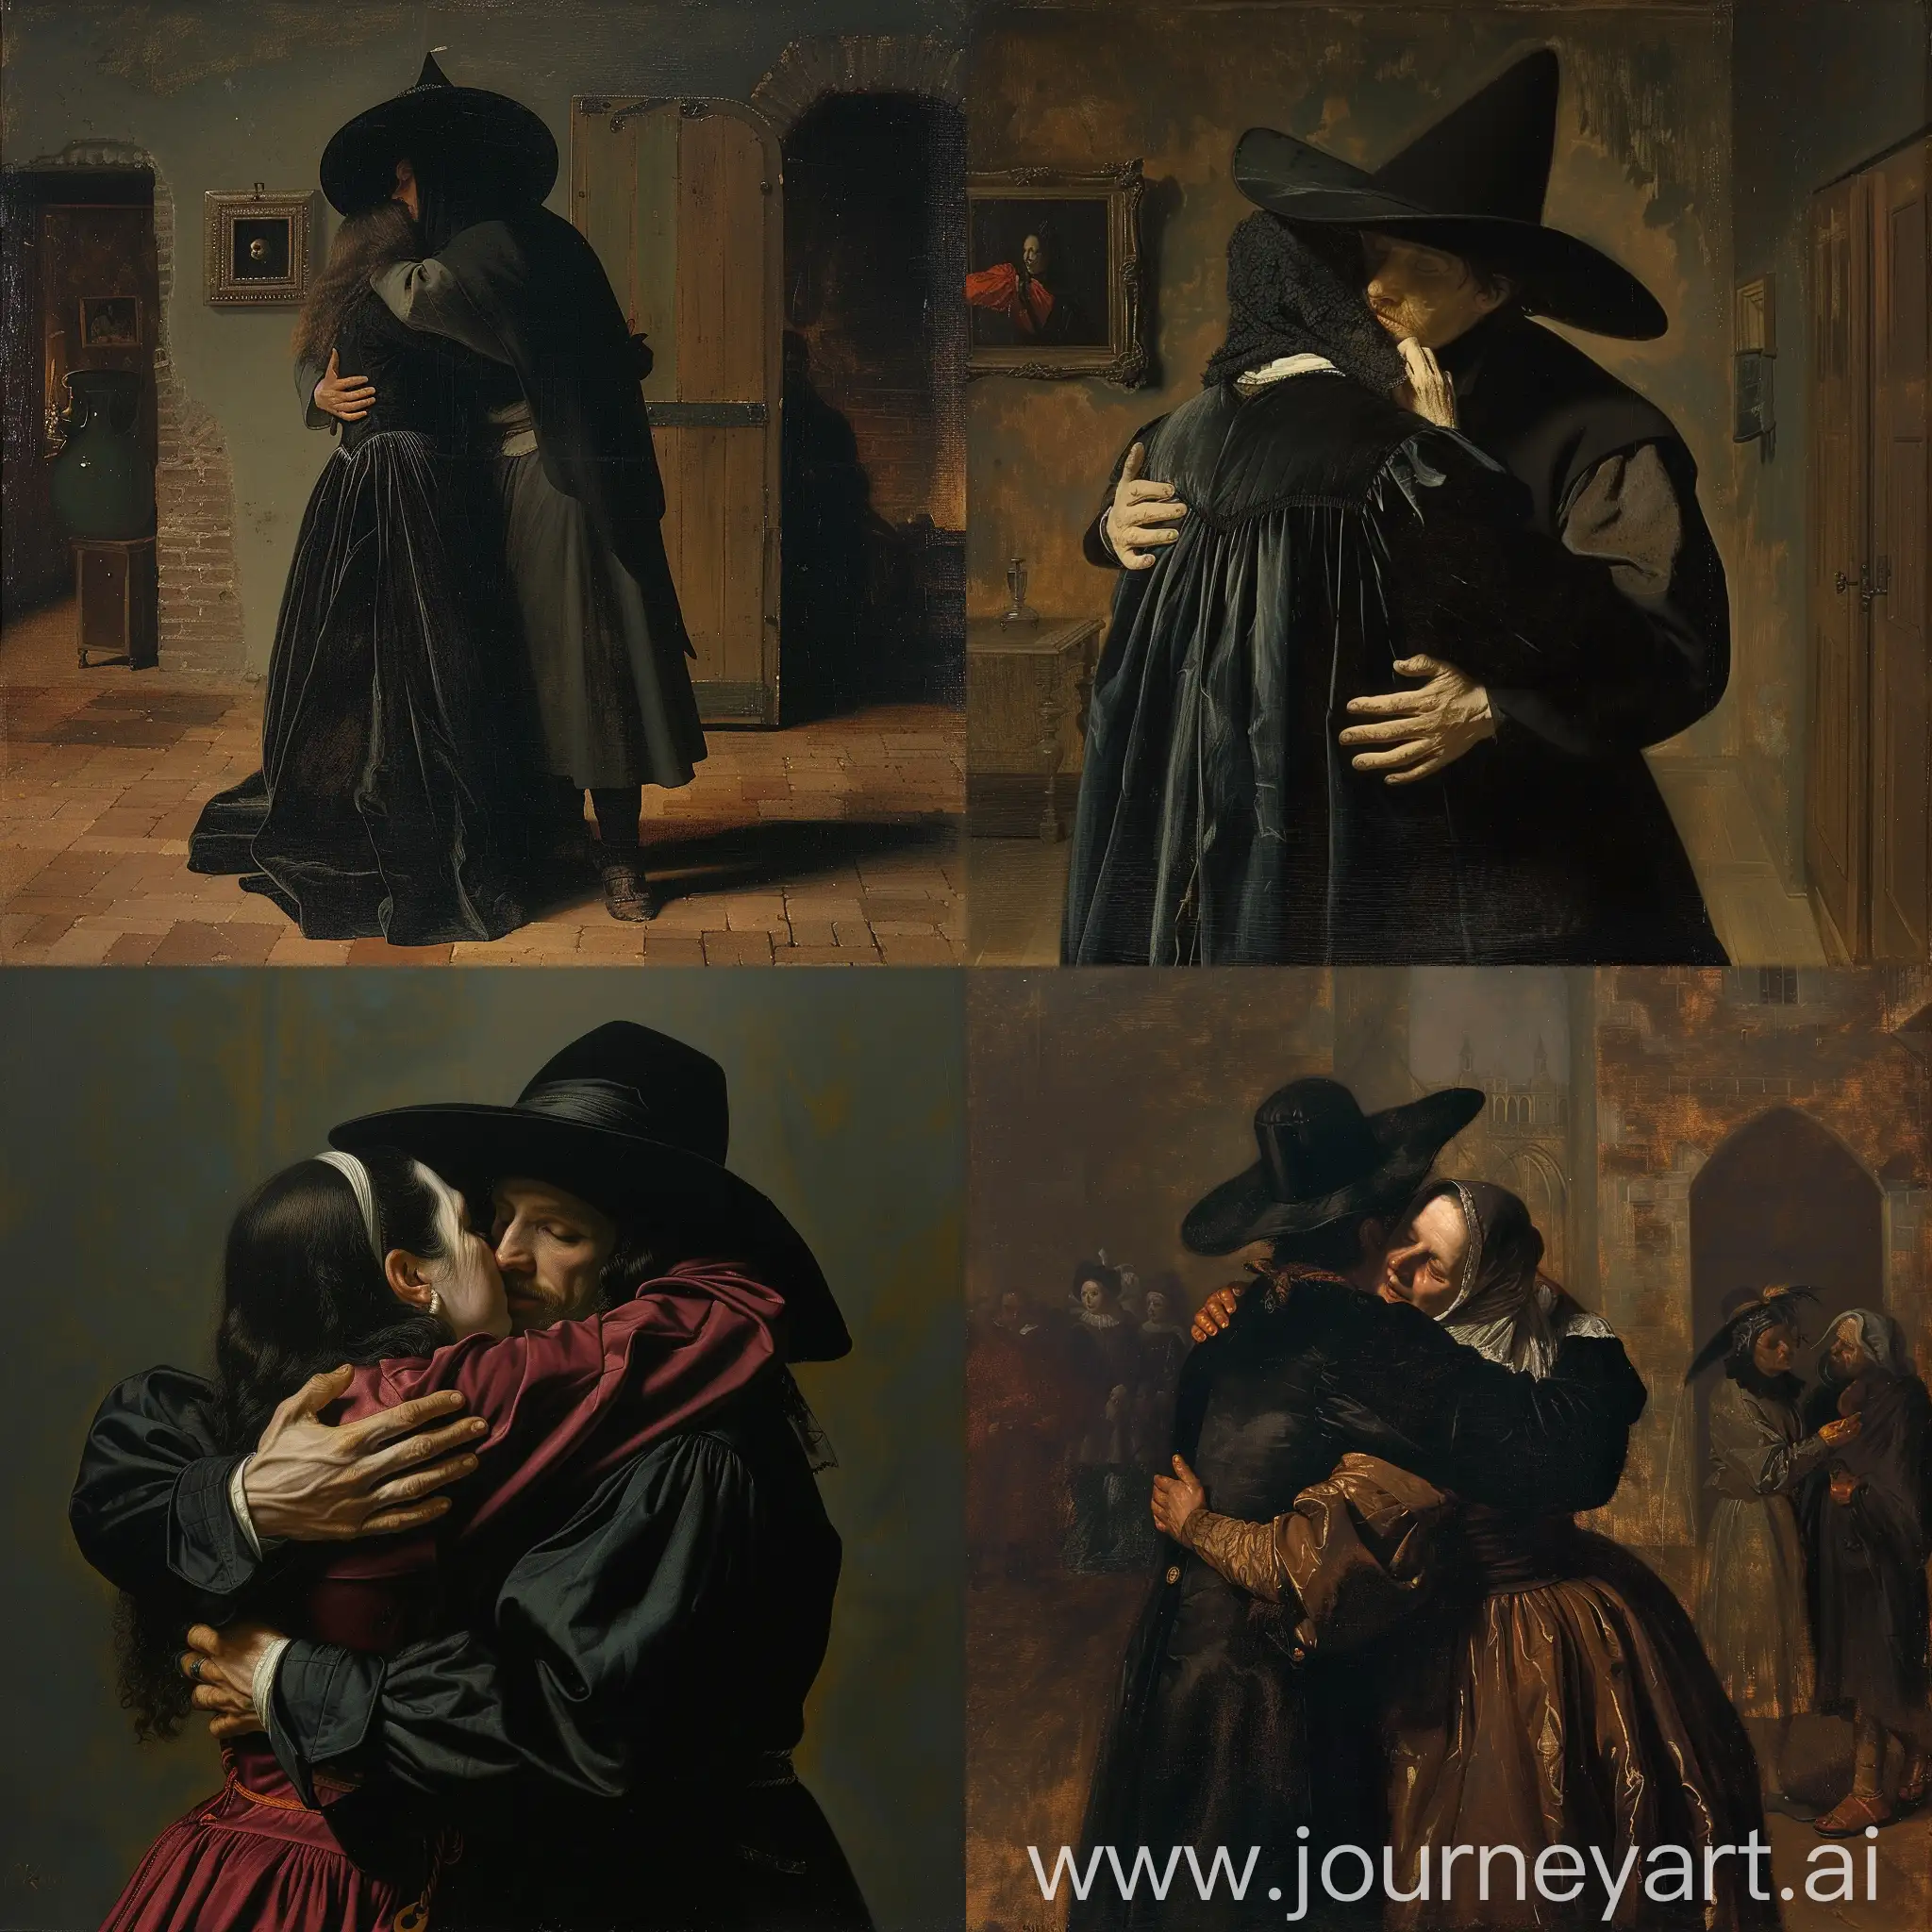 Spanish inquisitor romantically embraces witch in the style of vermeer